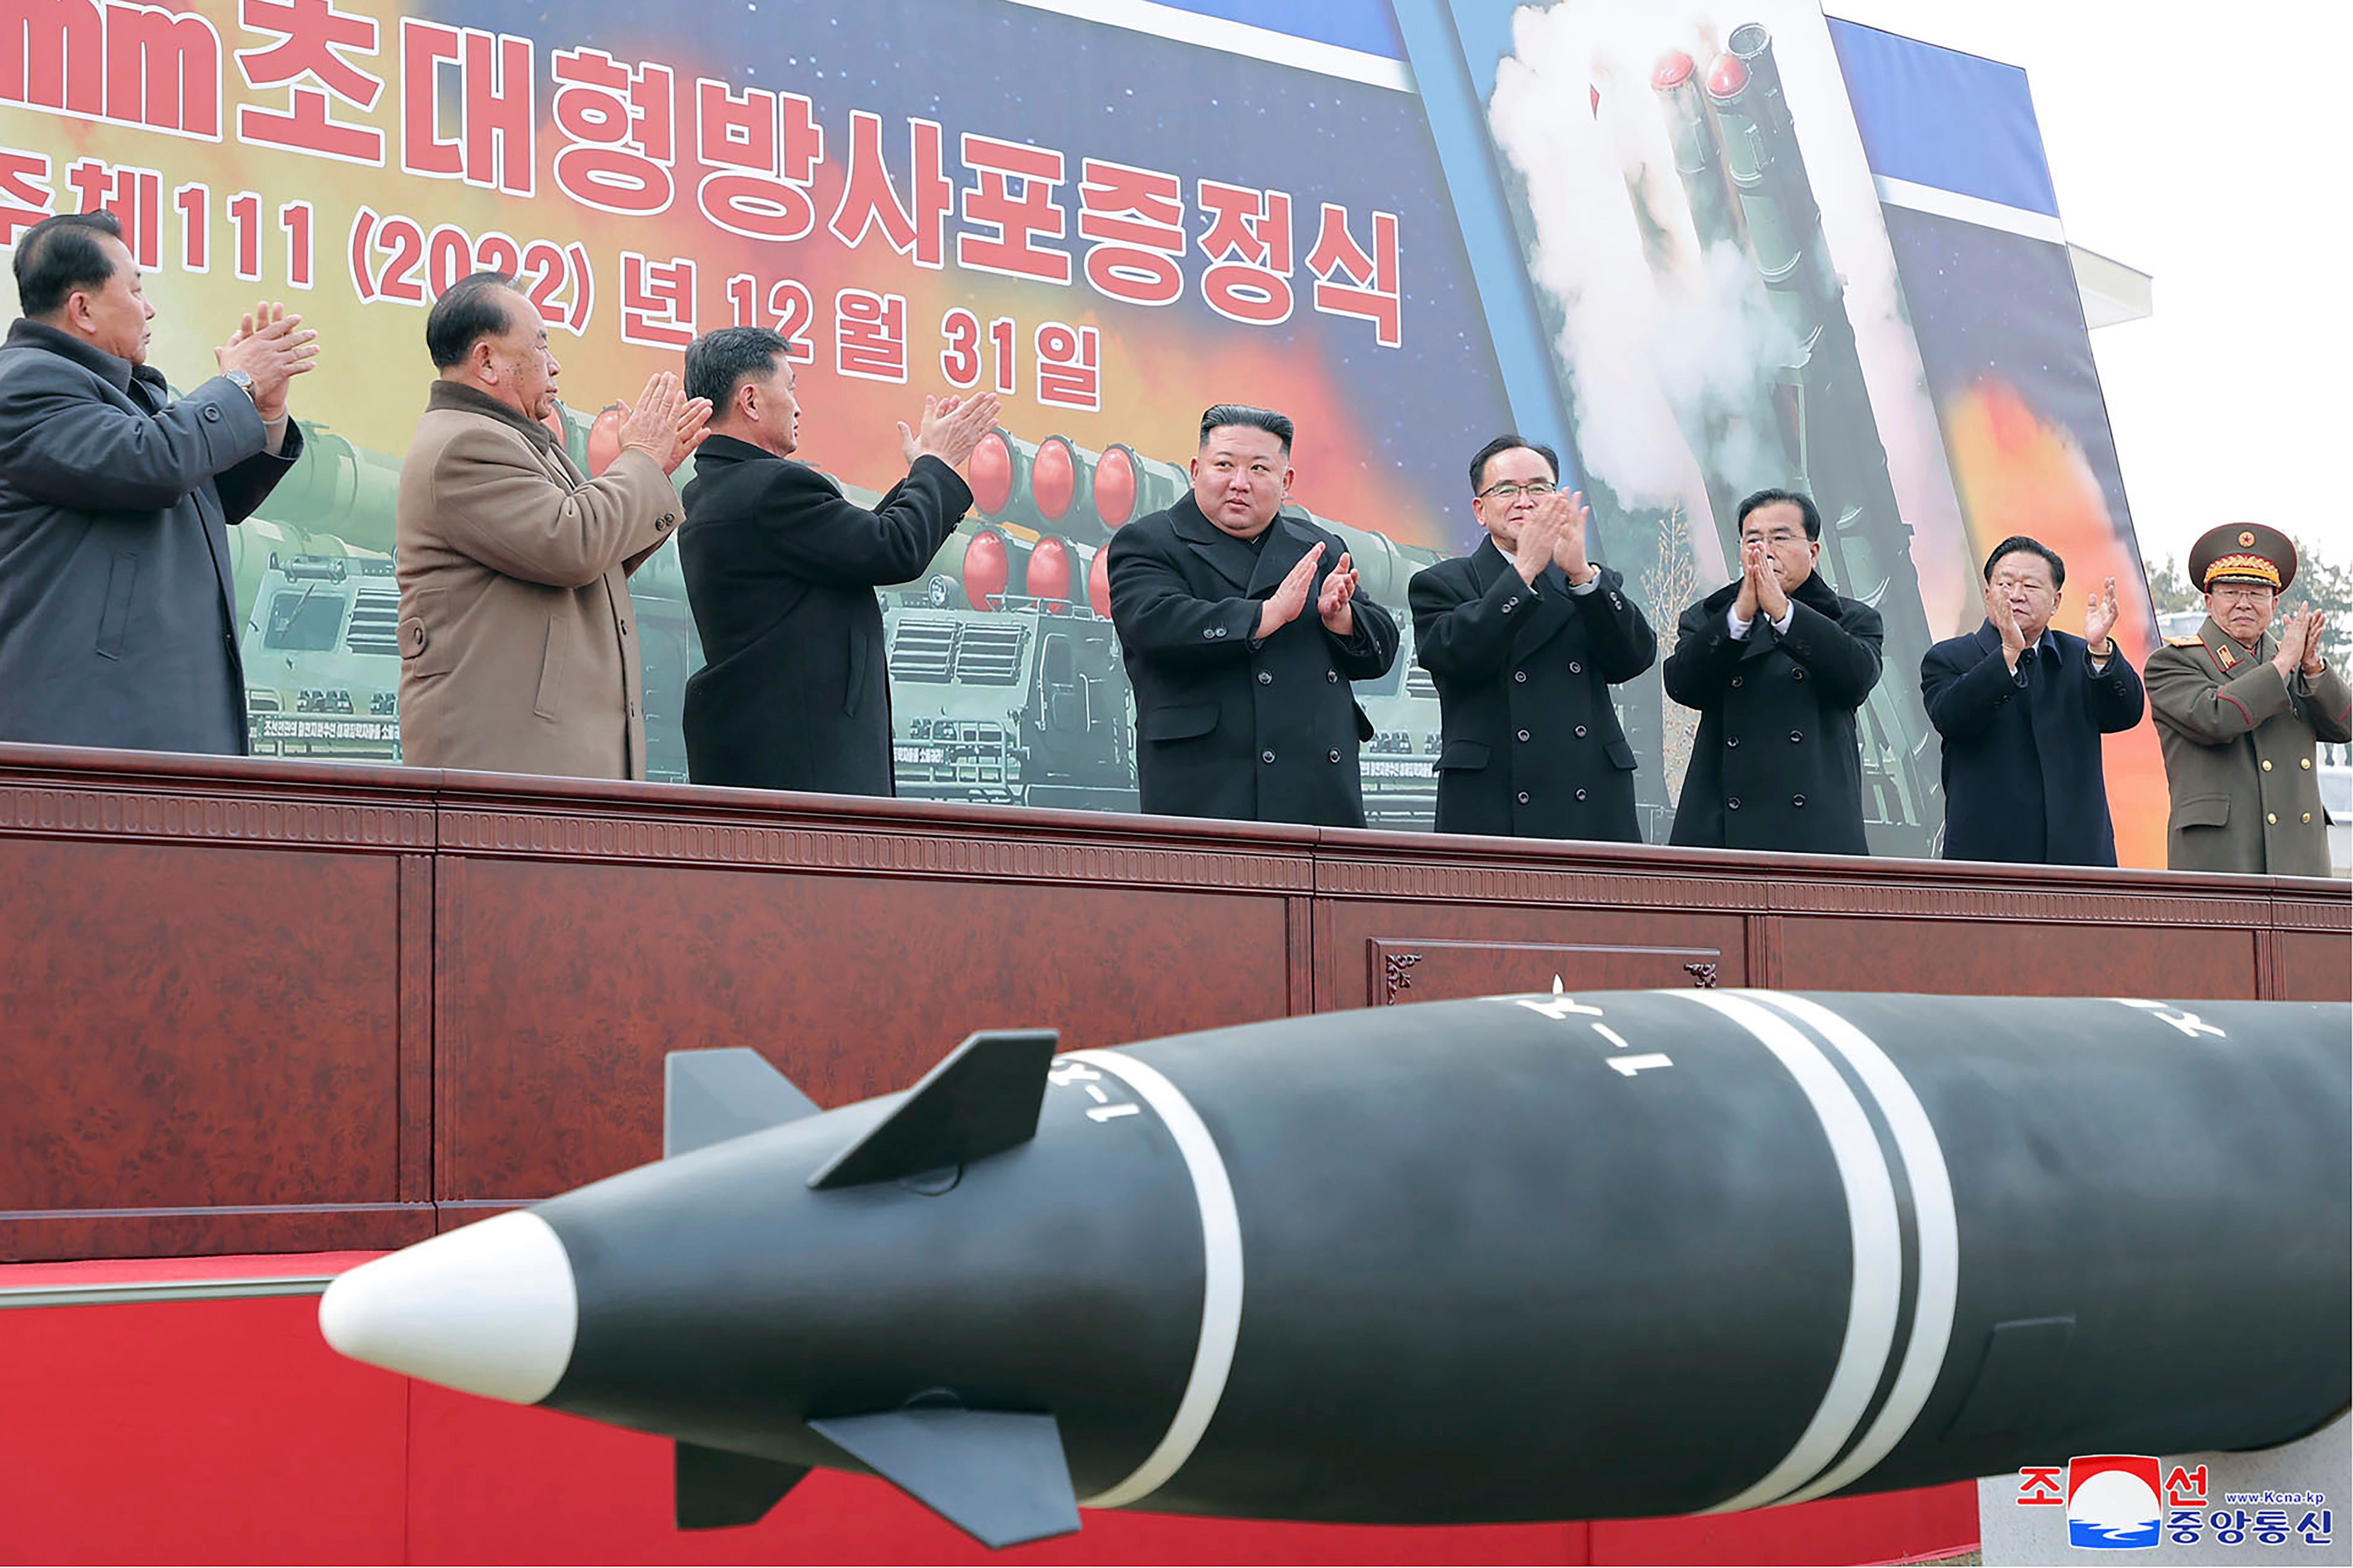 North Korean leader Kim Jong-un, center, attends a ceremony of donating 600mm super-large multiple launch rocket system at a garden of the Workers’ Party of Korea headquarters in Pyongyang